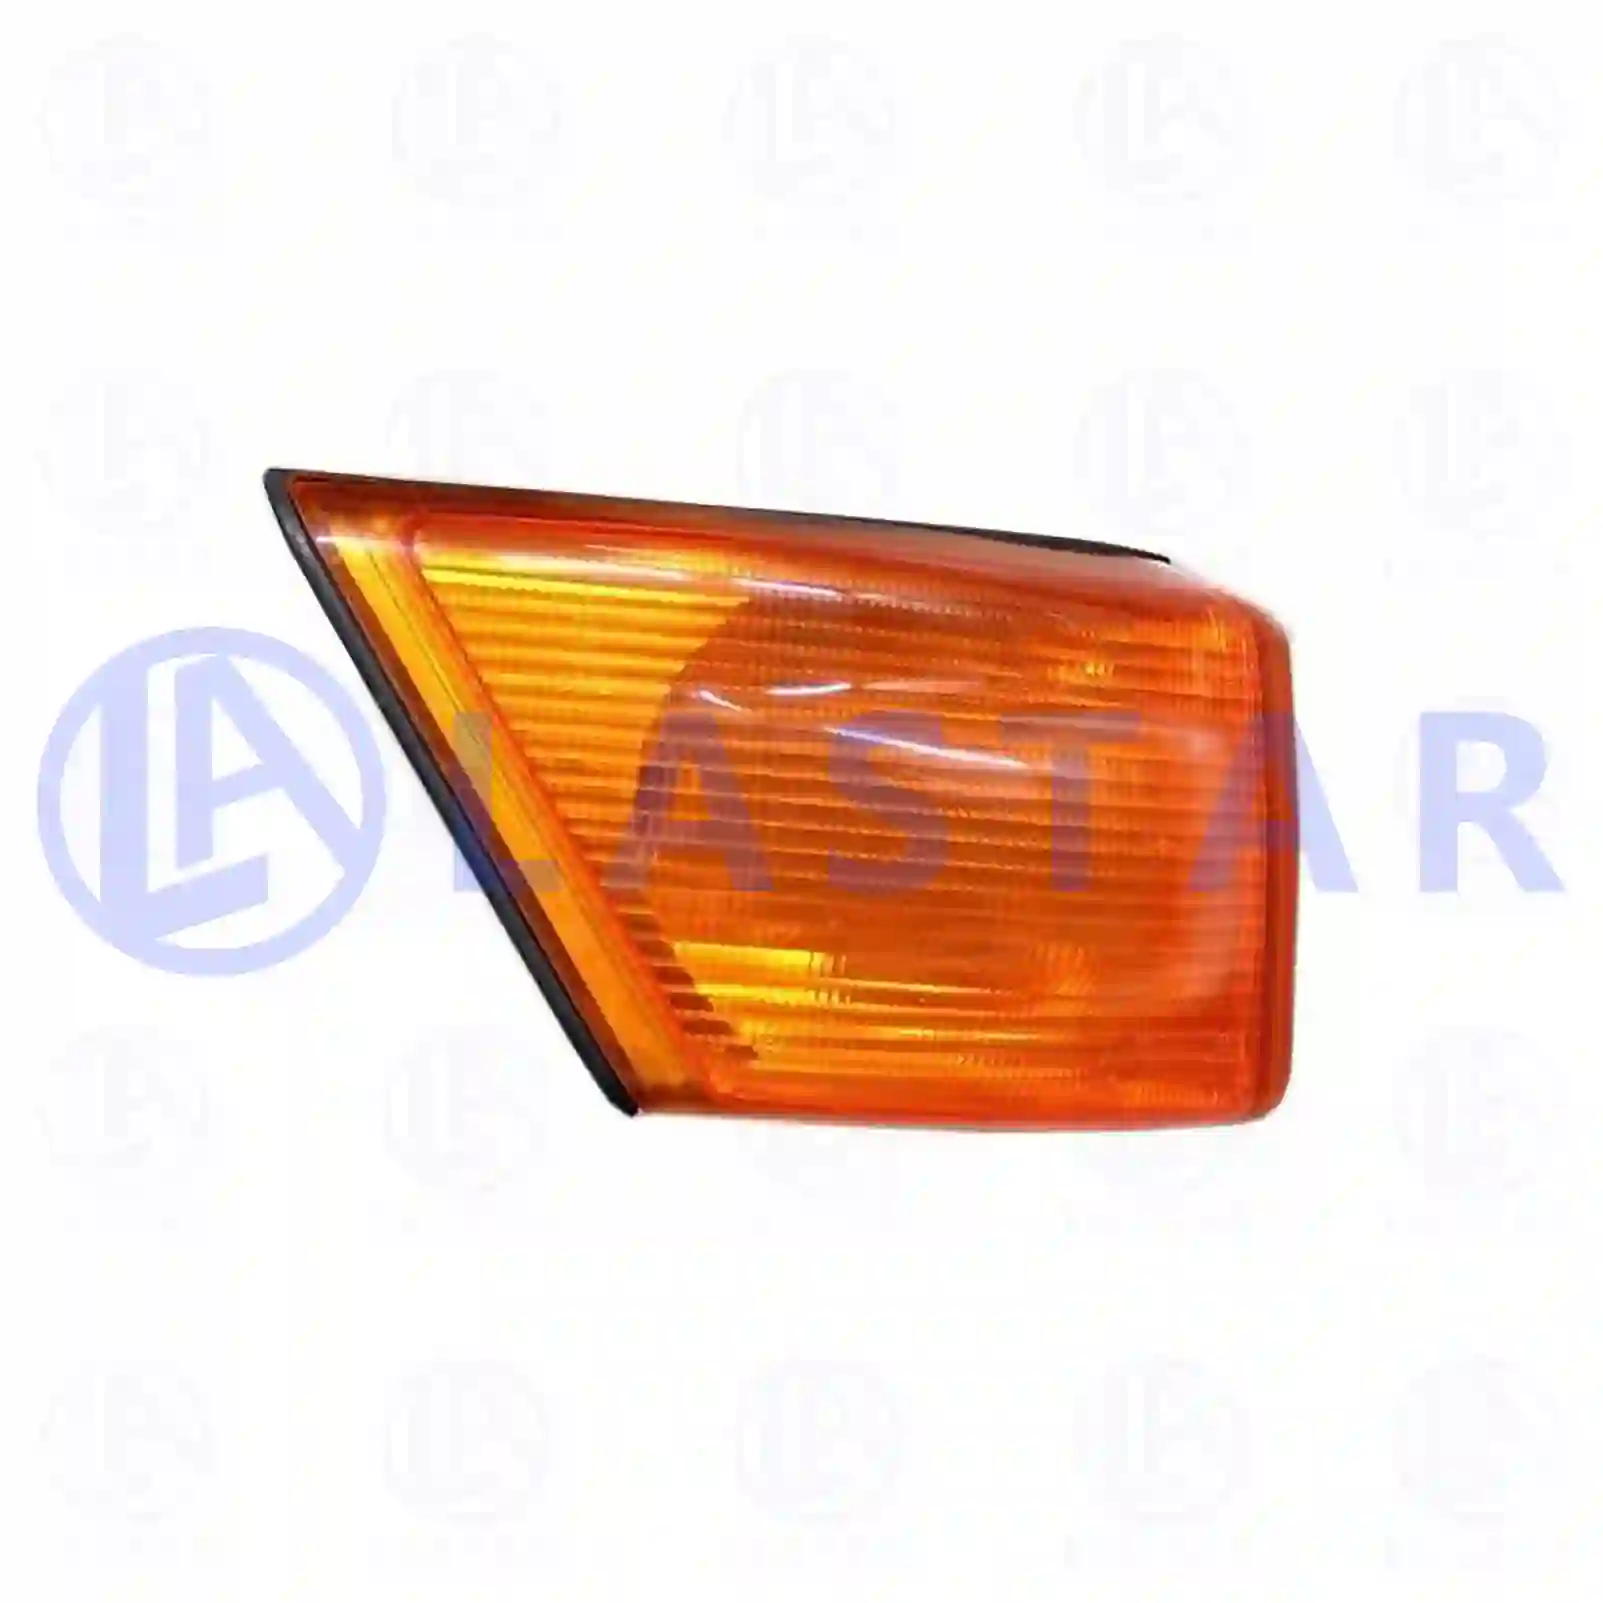 Turn signal lamp, right, without bulb, 77710034, 500320425 ||  77710034 Lastar Spare Part | Truck Spare Parts, Auotomotive Spare Parts Turn signal lamp, right, without bulb, 77710034, 500320425 ||  77710034 Lastar Spare Part | Truck Spare Parts, Auotomotive Spare Parts